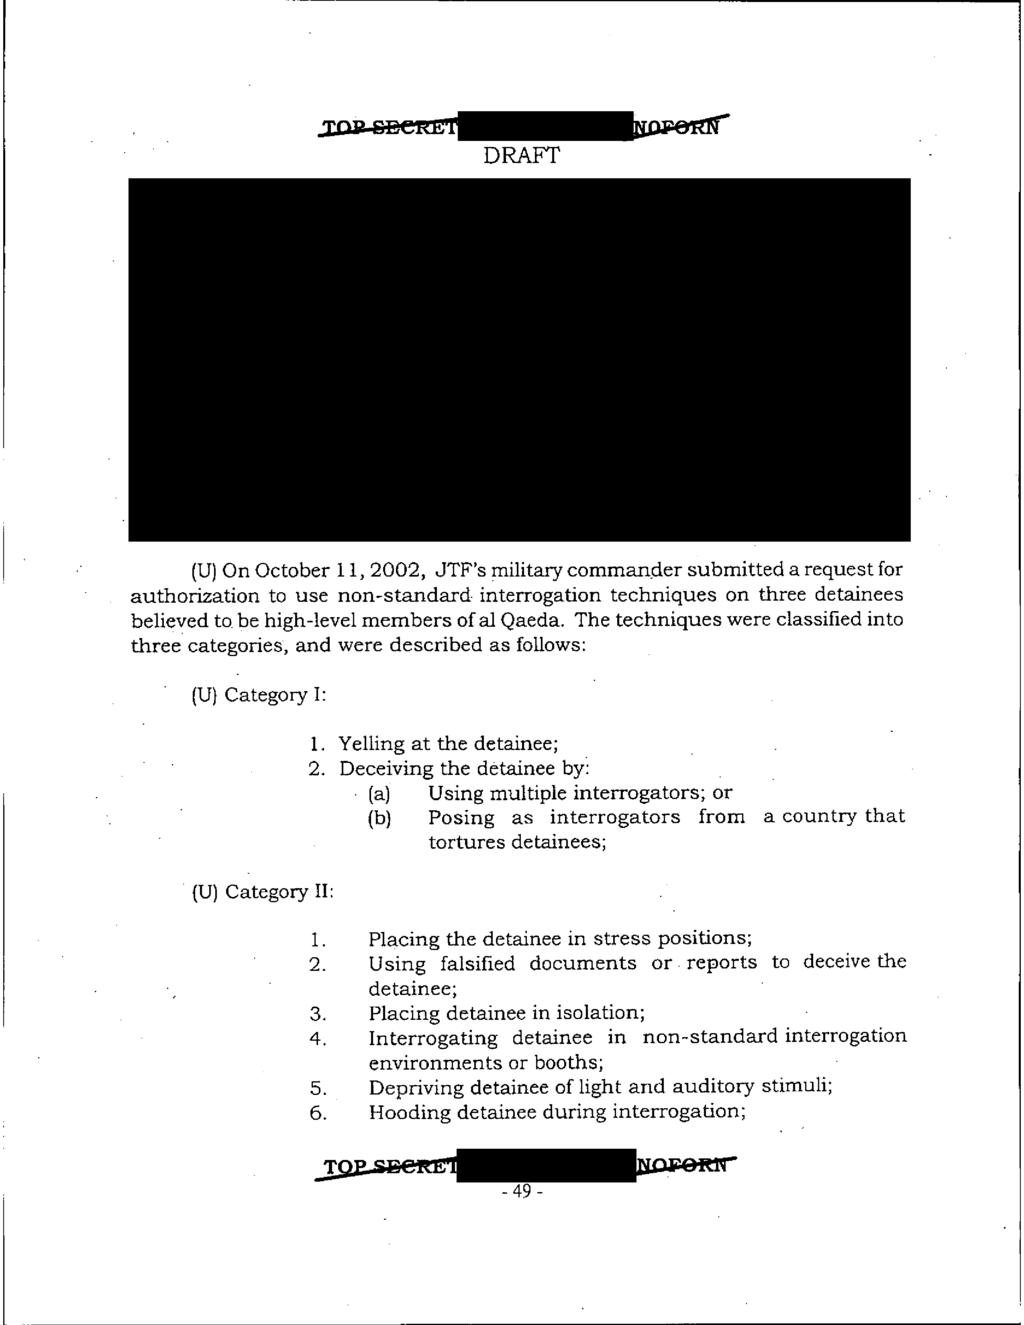 (U) On October 11, 2002, JTF's military commander submitted a request for authorization to use non-standard interrogation techniques on three detainees believed to be high-level members of al Qaeda.